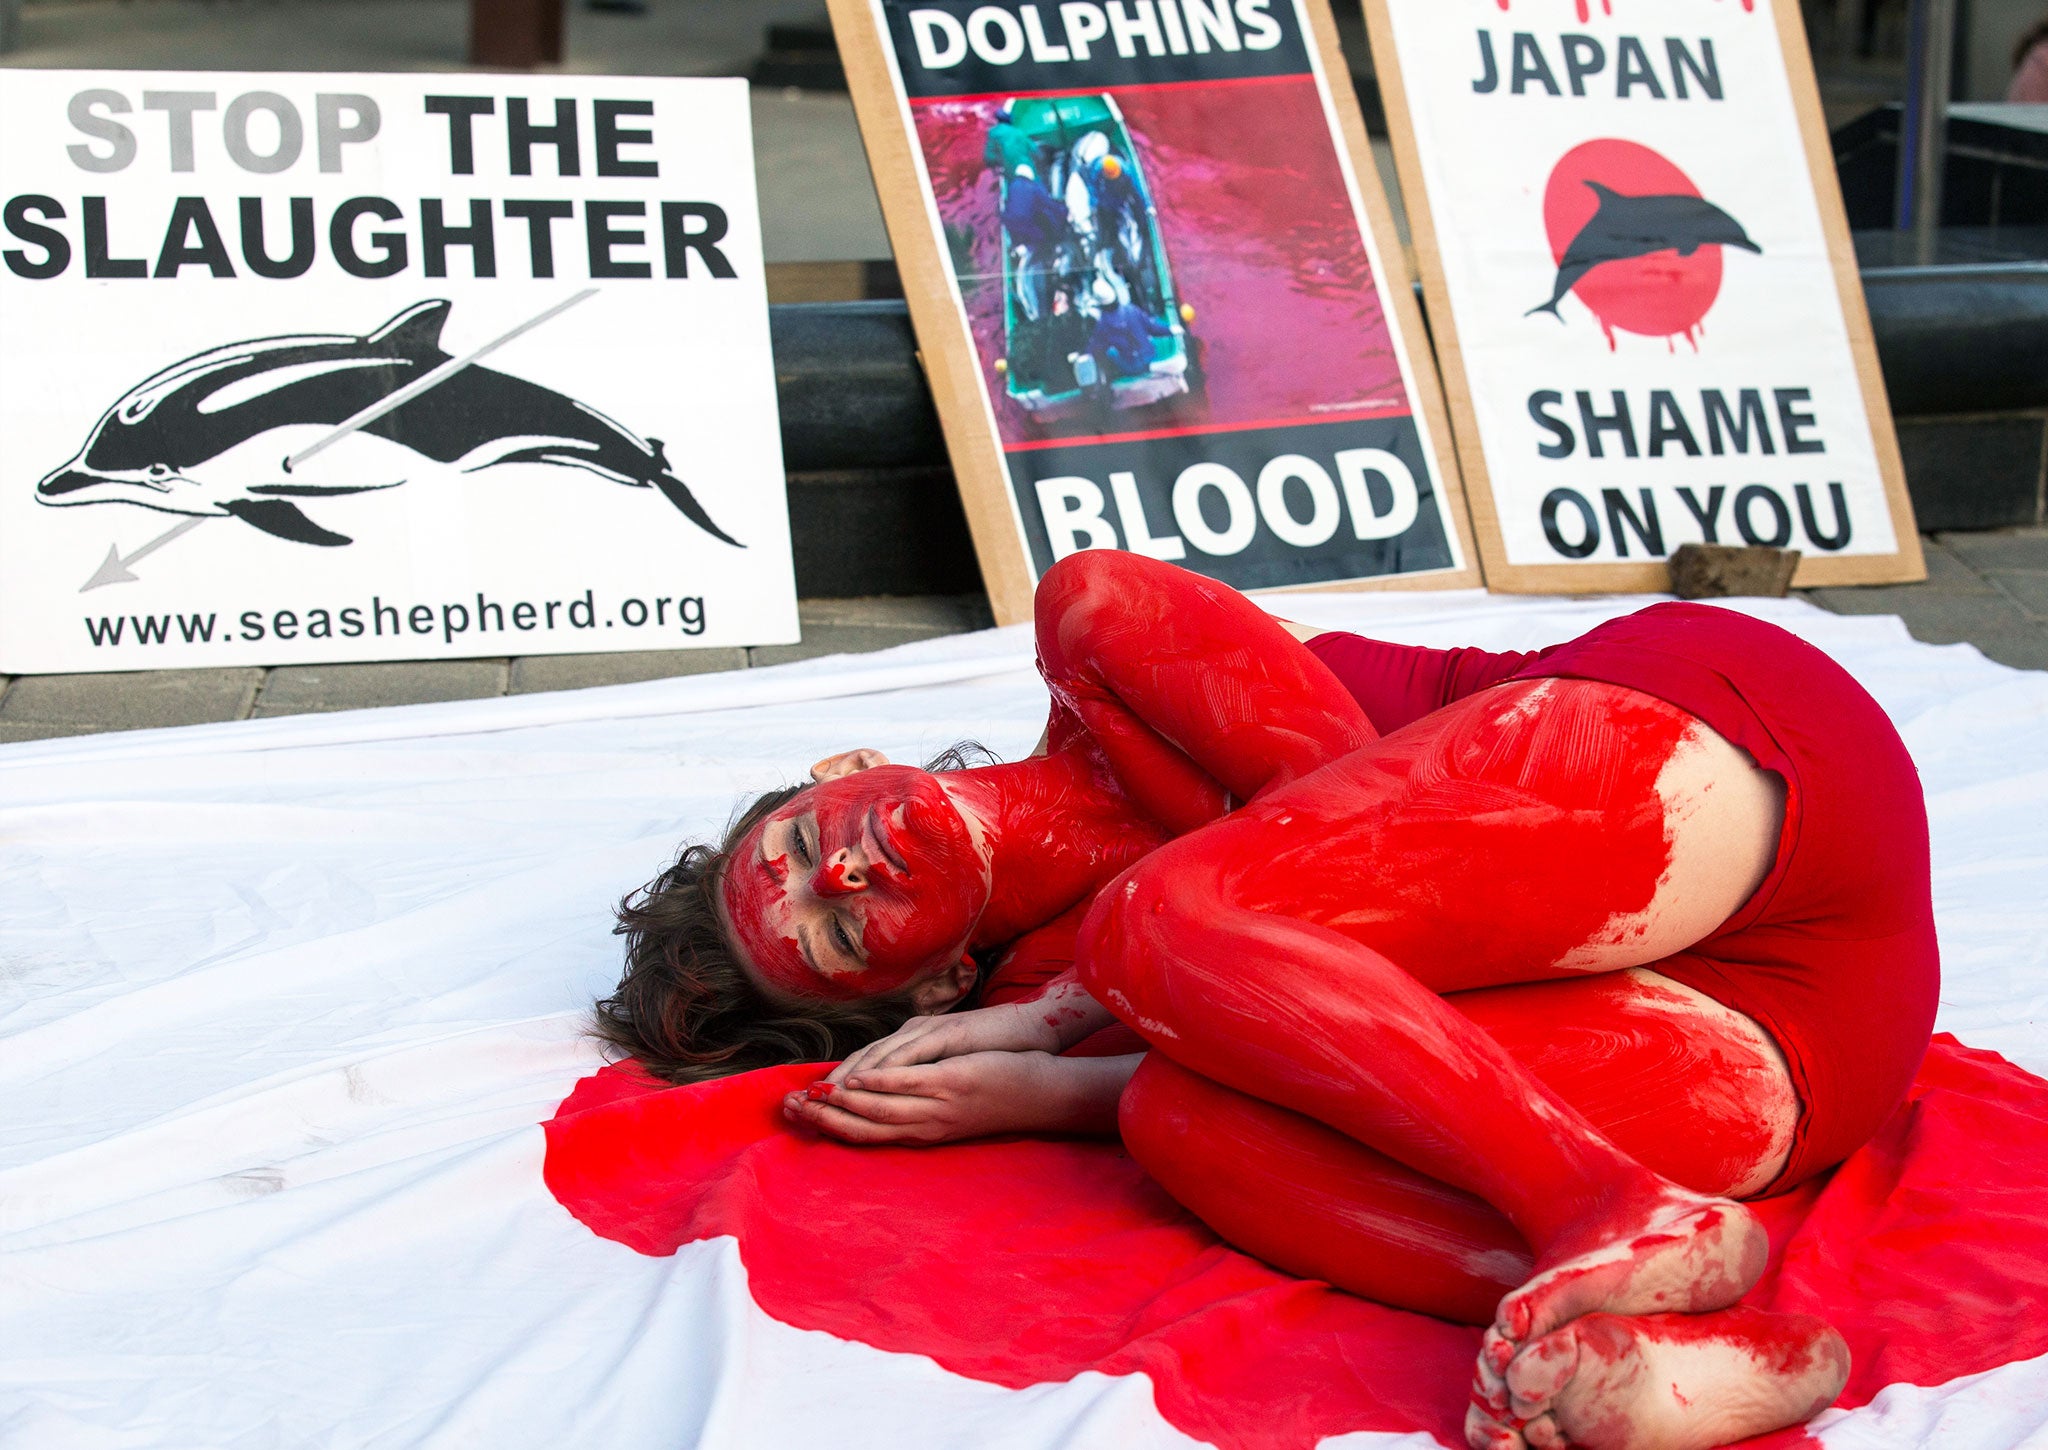 A member of the 'Taiji Dolphin Action Group', curls up on a sheet depicting the Japanese flag